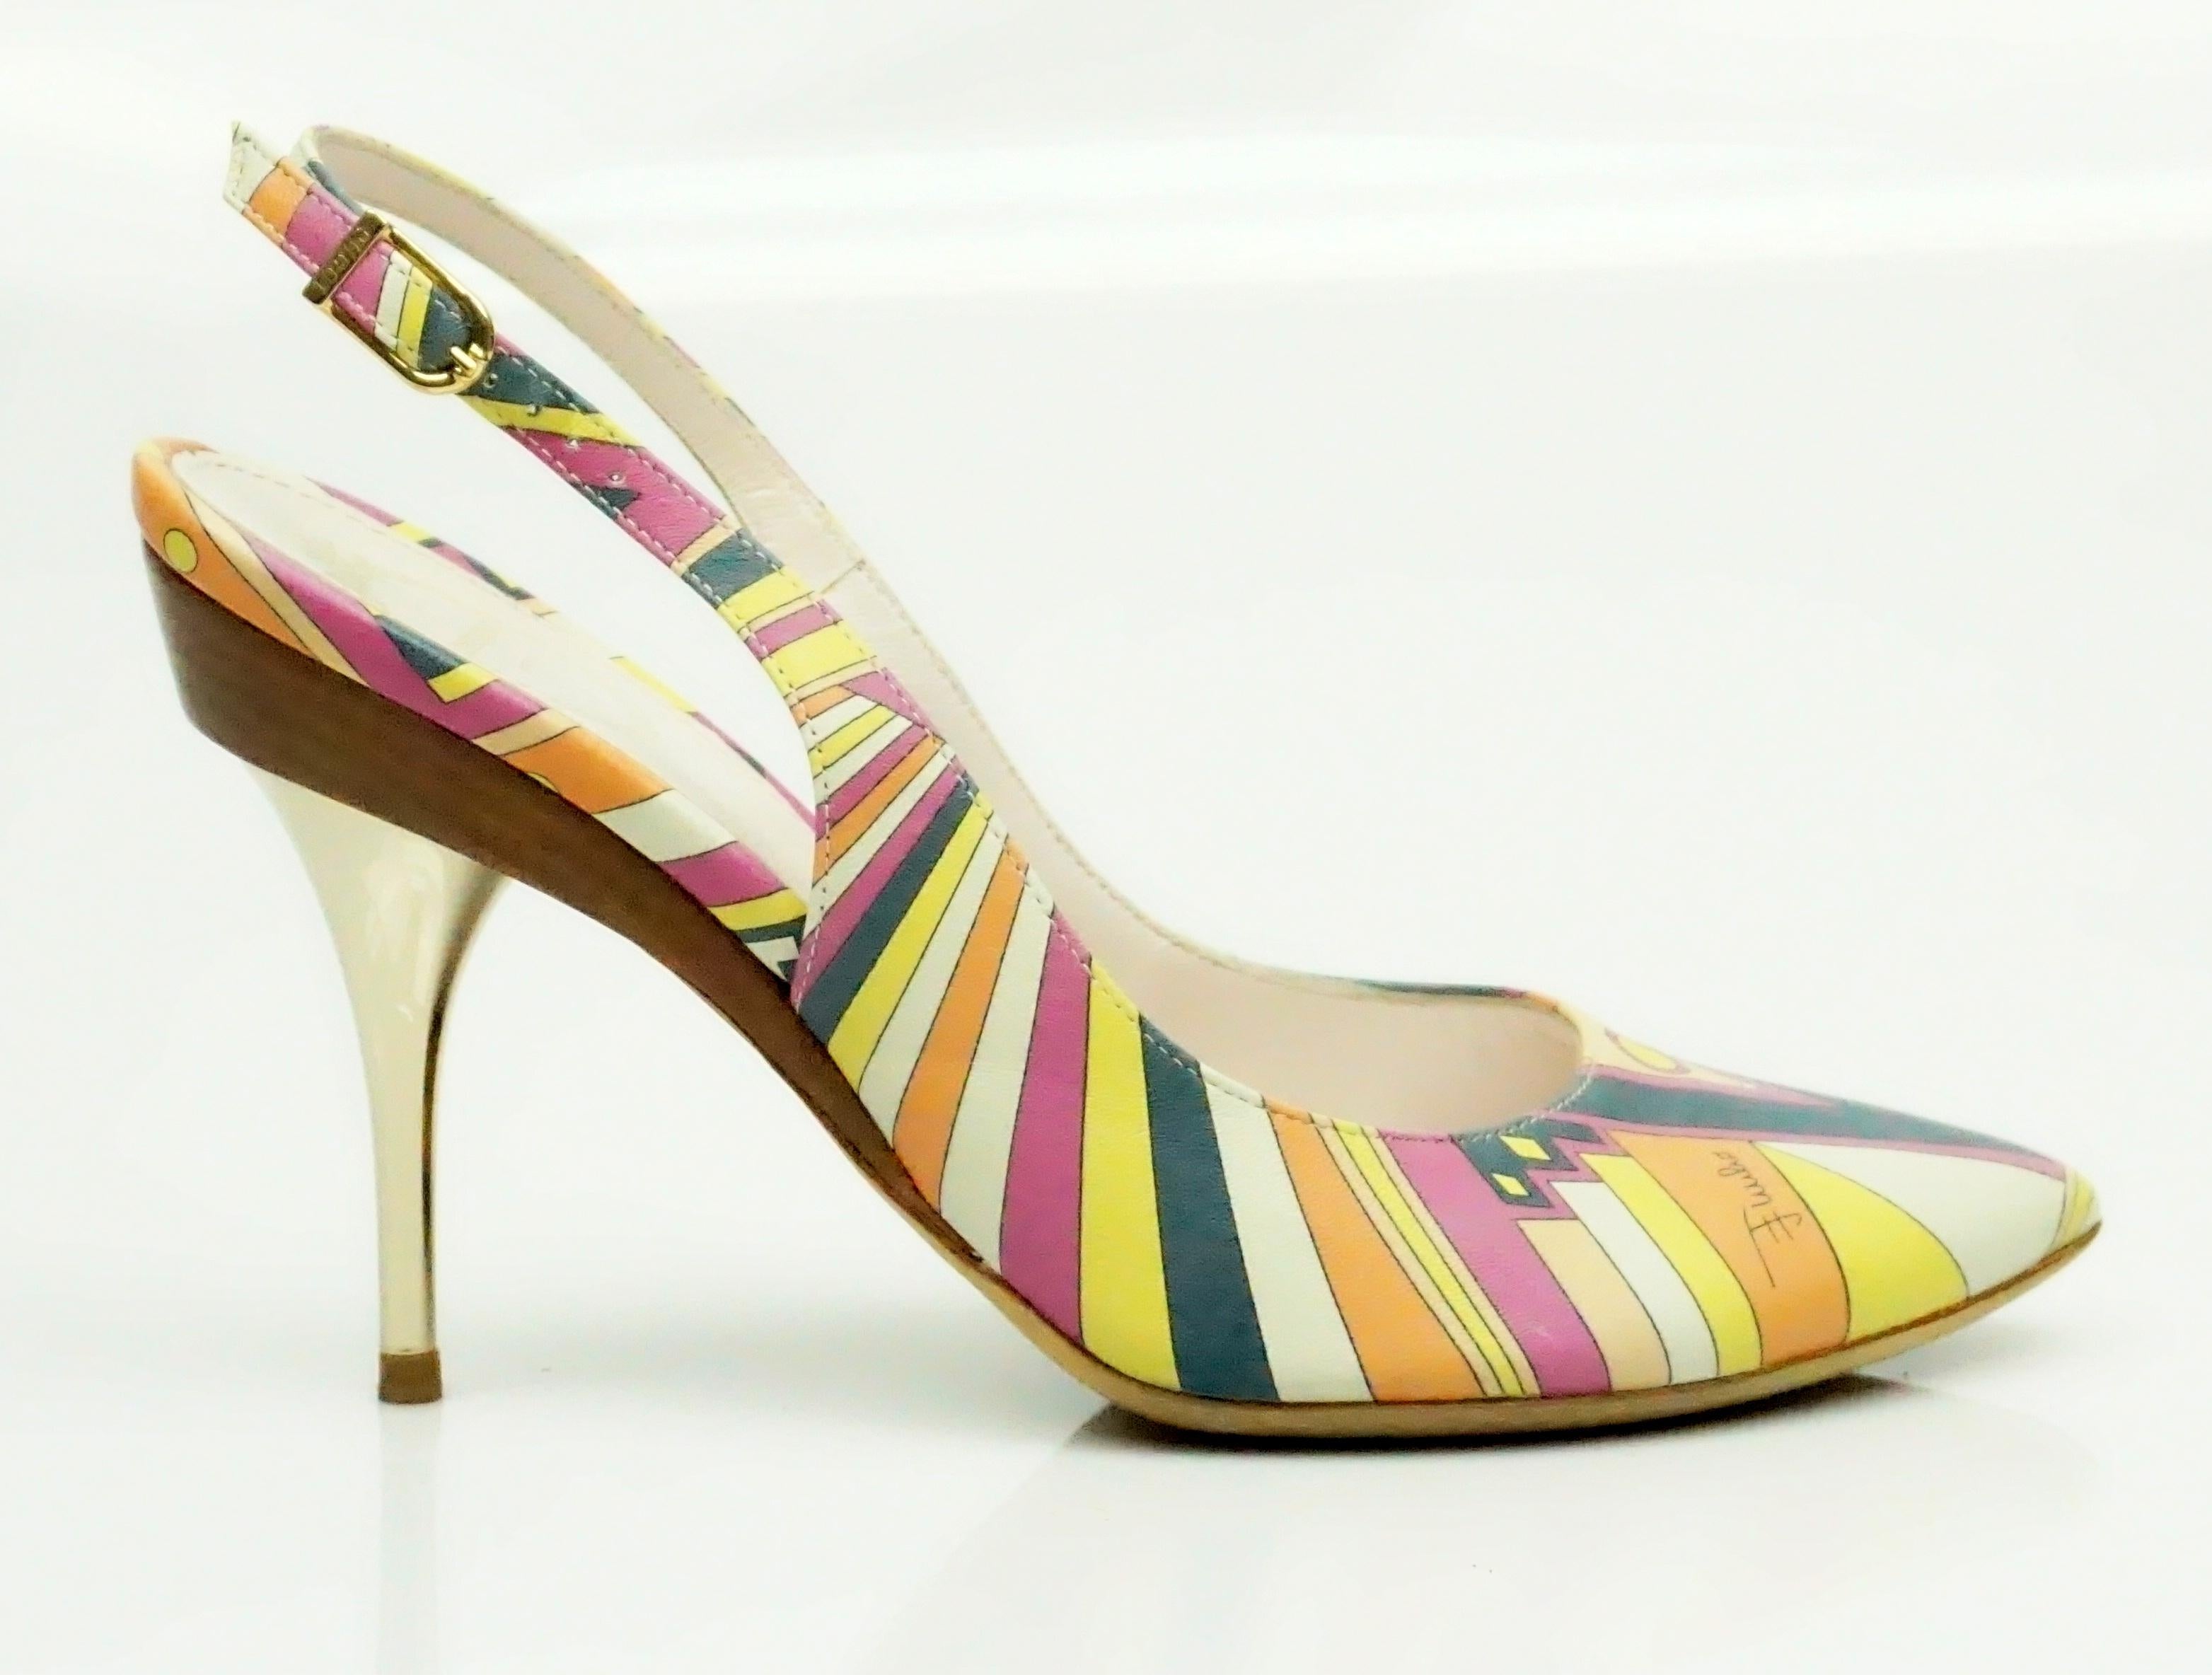 Emilio Pucci Multi Printed Leather Slingbacks - 36  These gorgeous heels are in excellent condition. The heels have a classic Emilio Pucci print on them and the fabric is made out of leather. The heel starts with a wood layer and then becomes a